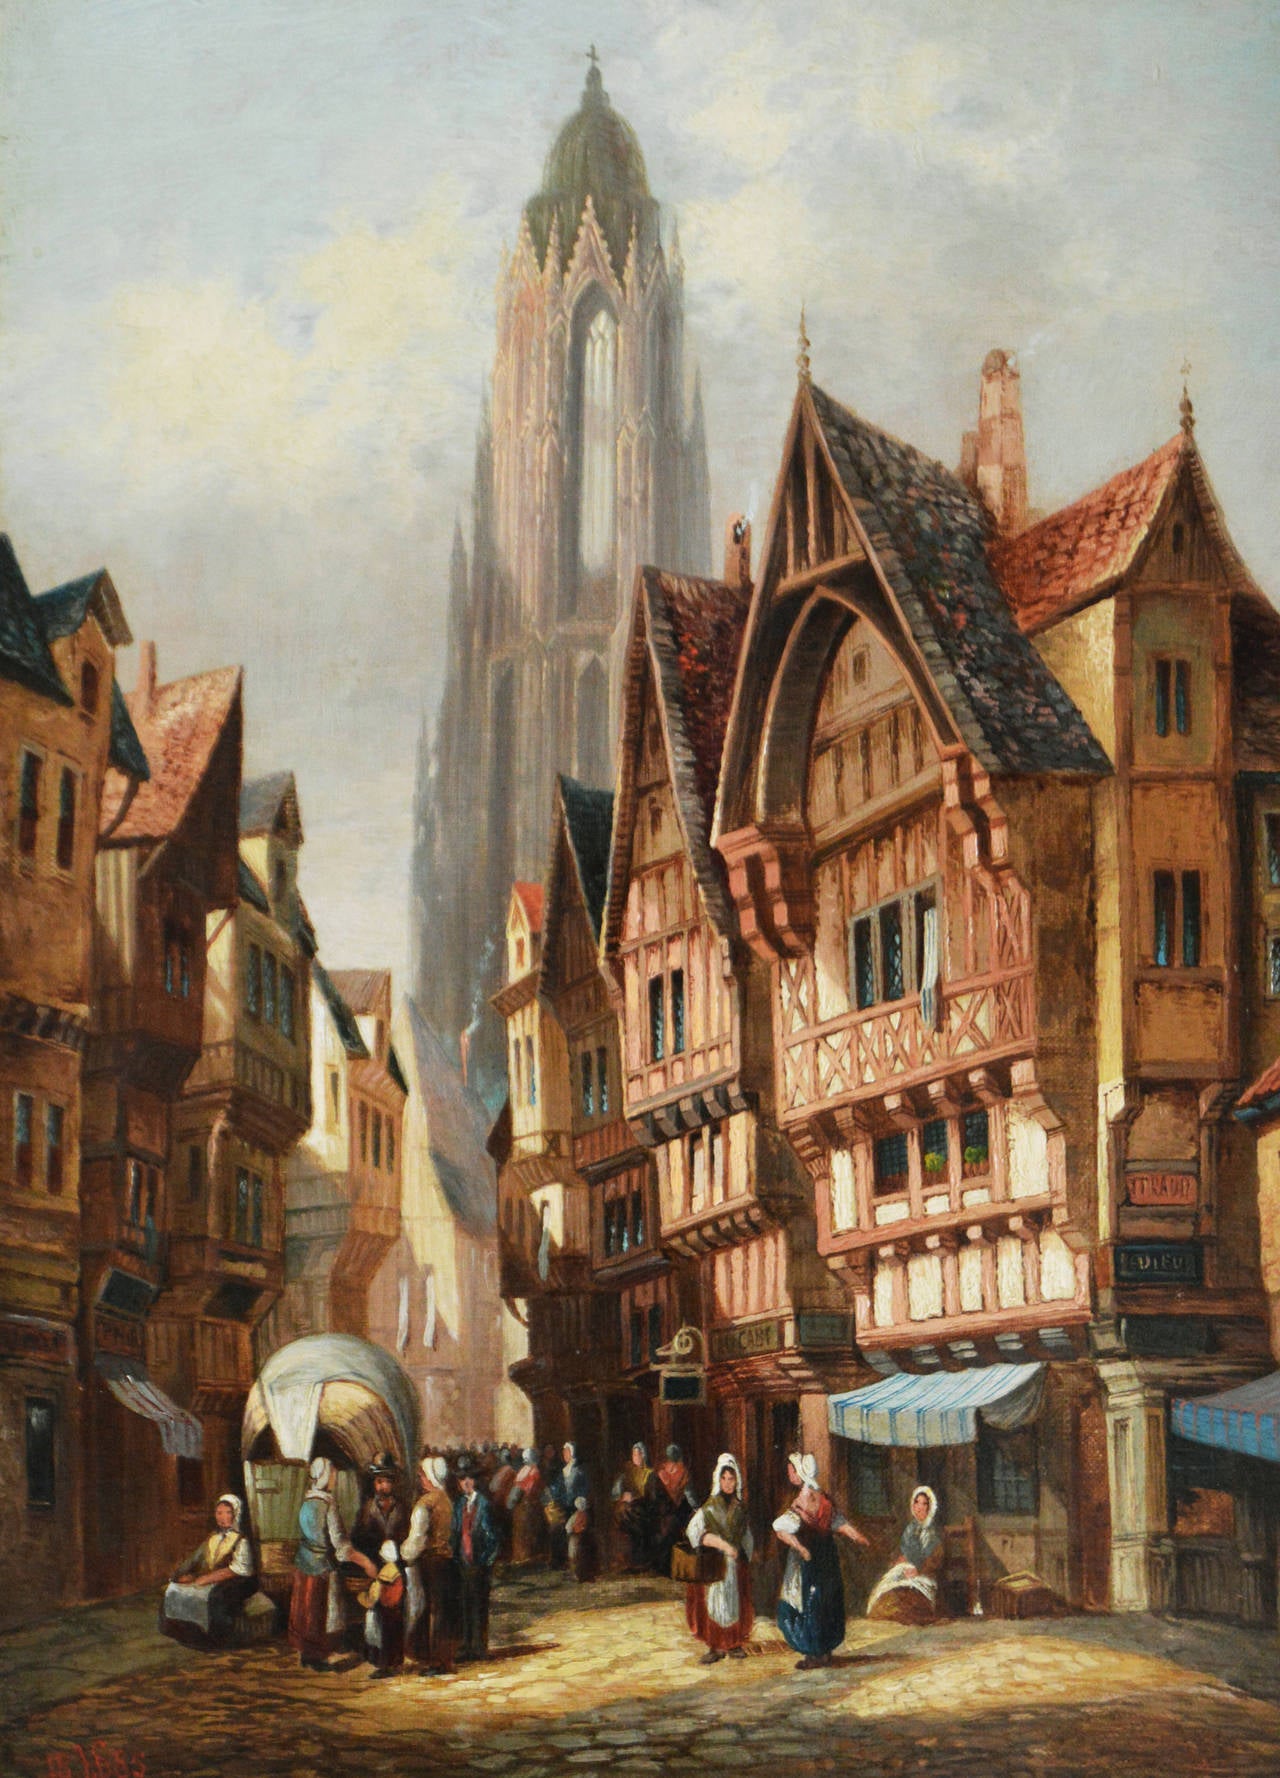 Henry Schafer.
German/British, (b.1841, fl.1865-1900).
Frankfurt Cathedral.
Oil on canvas, signed and dated 1885.
Image size: 16 inches x 12 inches. 
Size including frame: 22½ x 18¾ inches.

An interesting topographical painting of Frankfurt